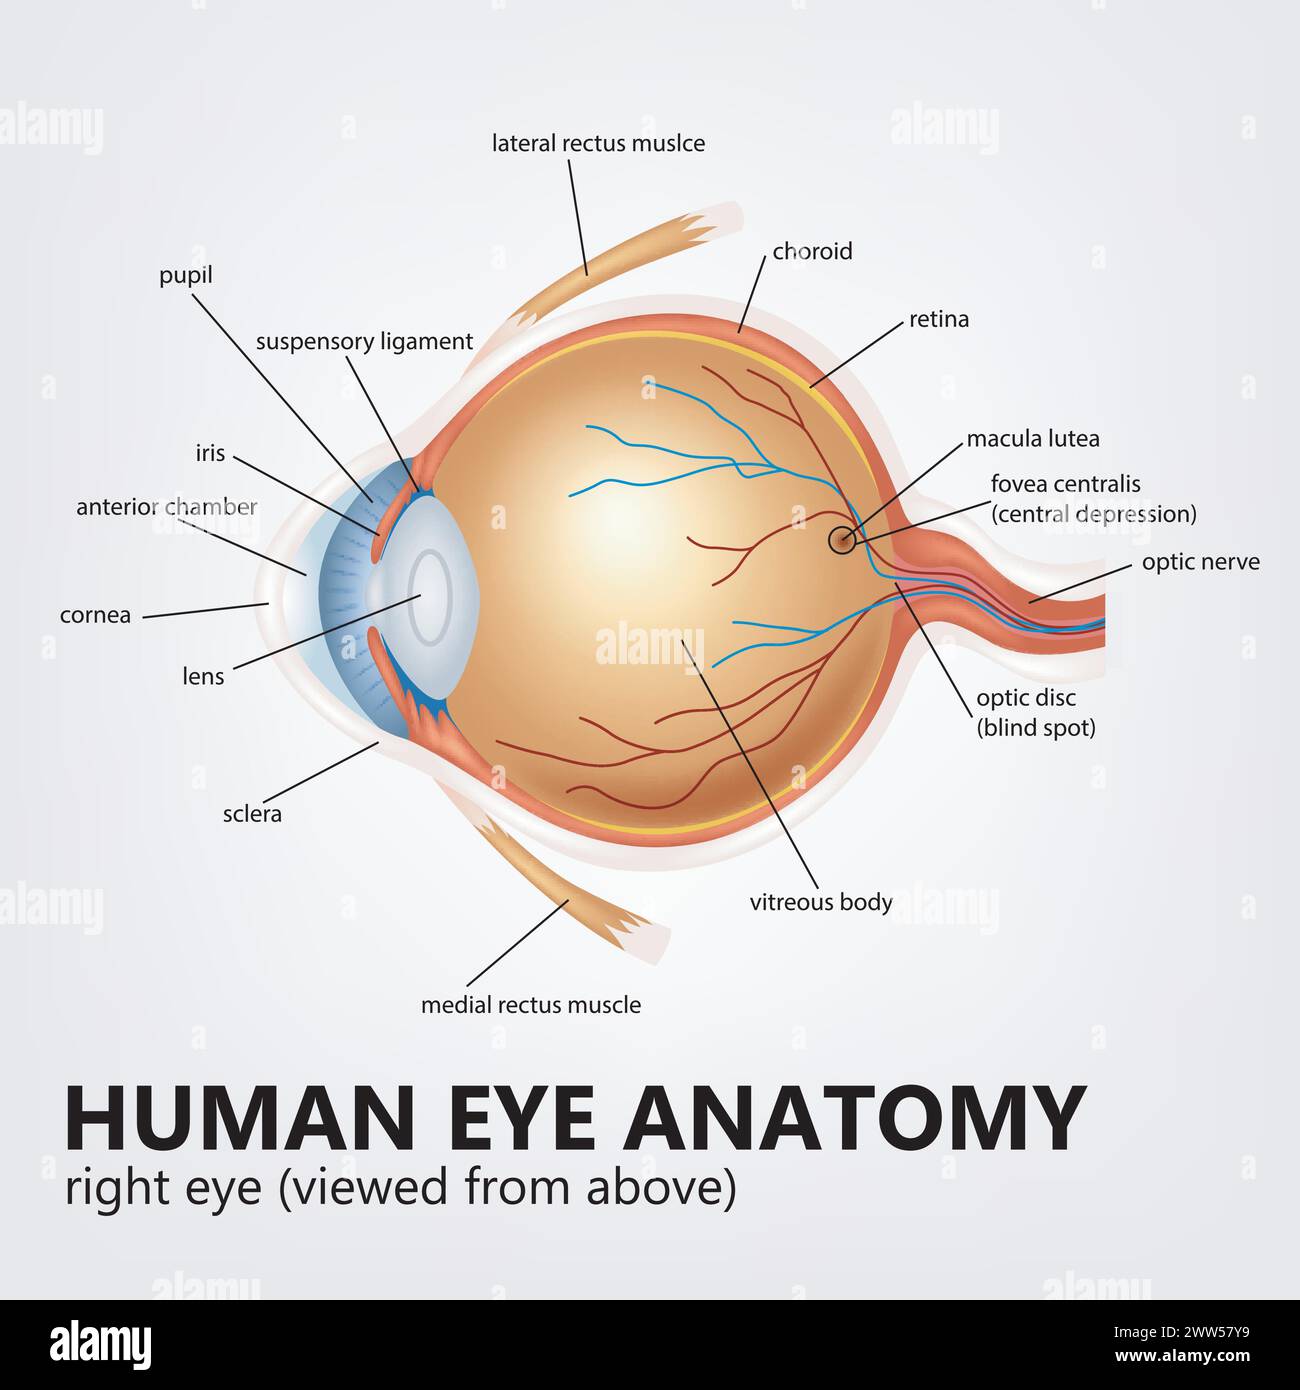 Human Eye Anatomy, Right Eye Viewed From Above, Vector Illustration Stock Vector